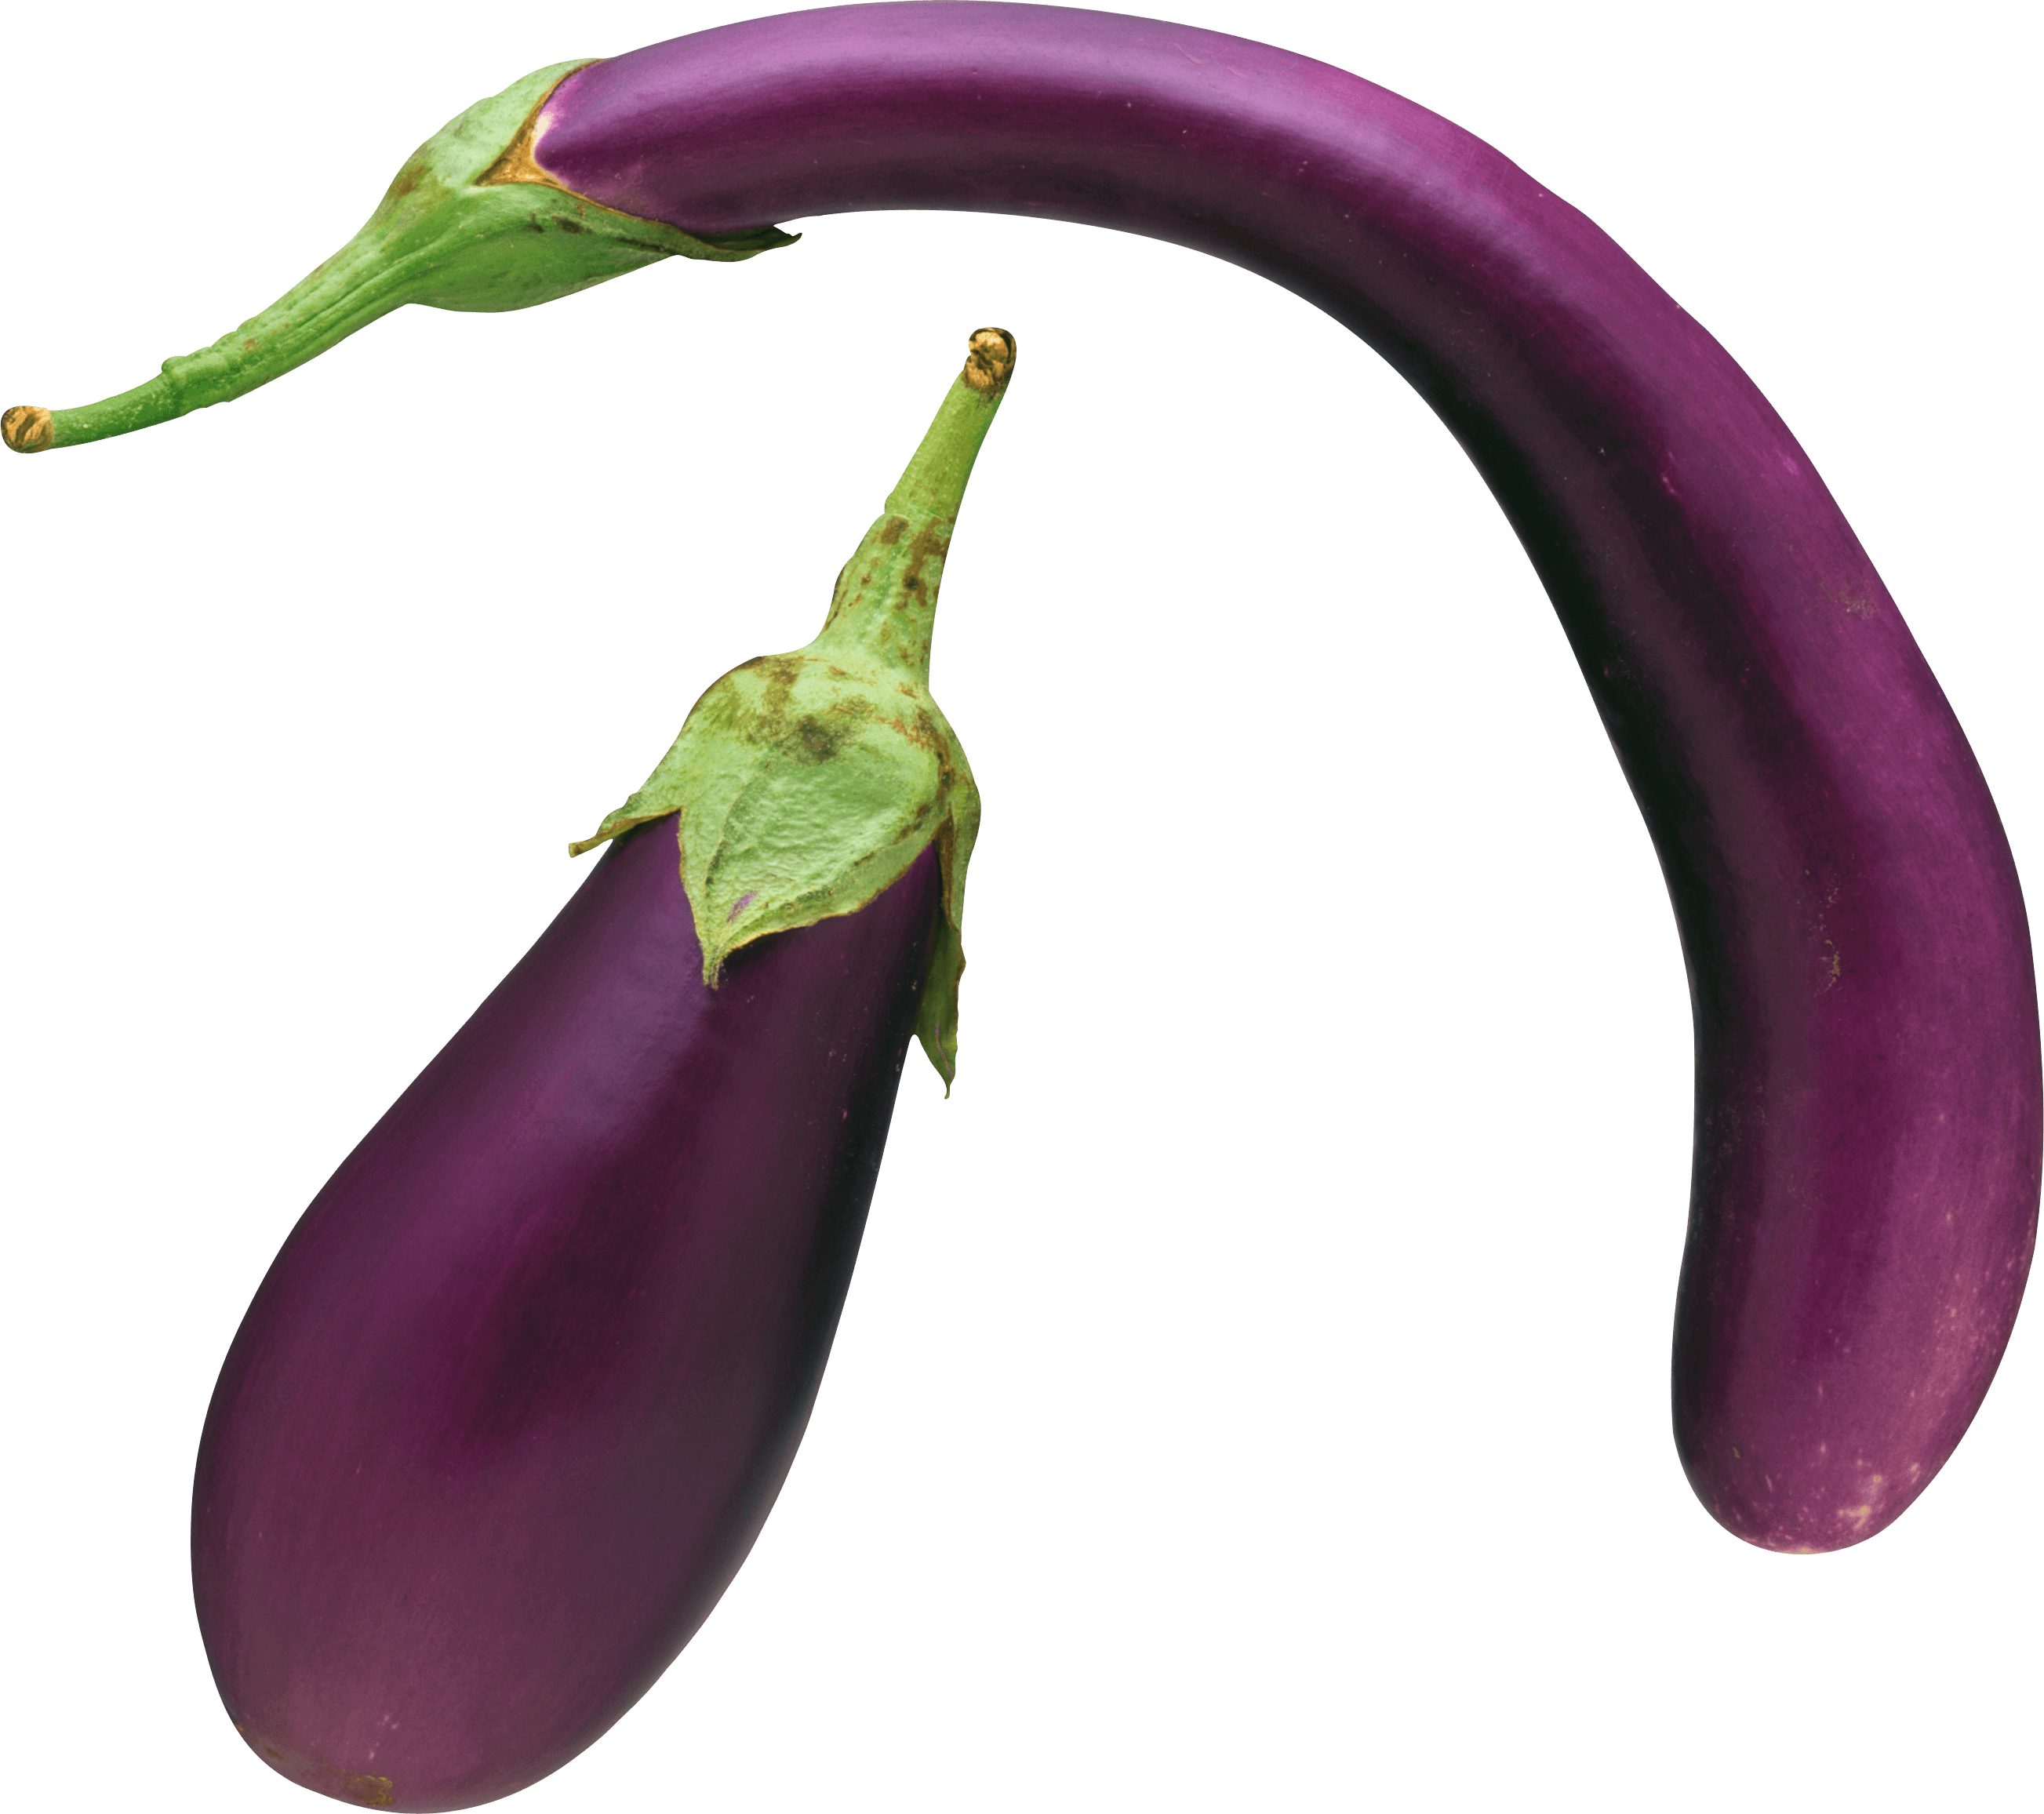 Eggplant Gym Fit Zucchini Unpeeled PNG